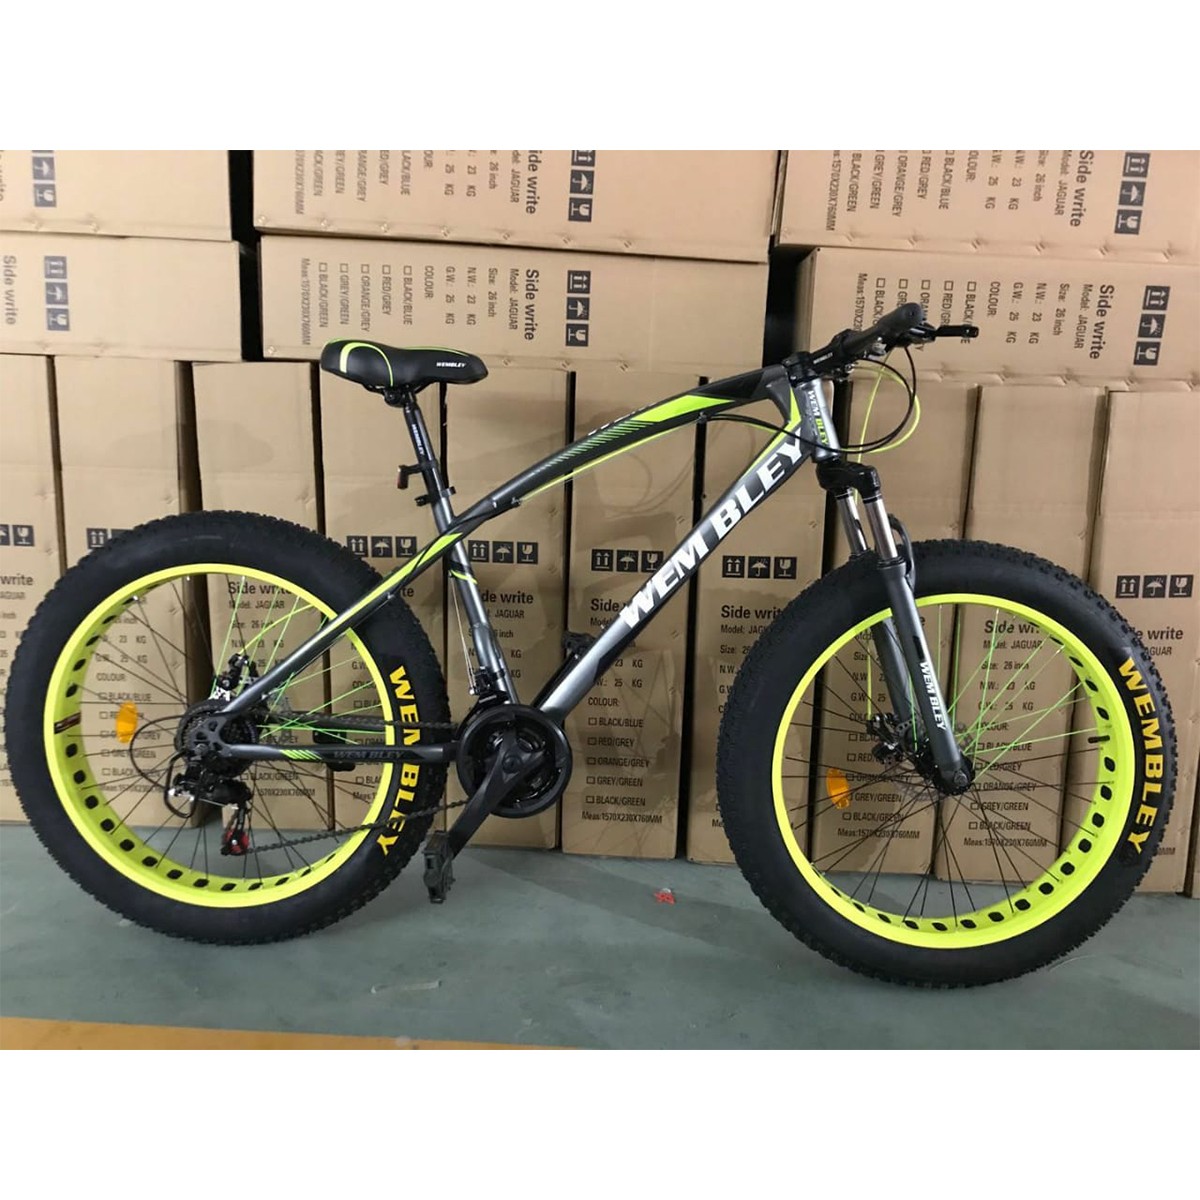 Welkom B olie oogsten Wembley Fat Bike for Workout & Fitness - The Wheels Online Cycle Shop